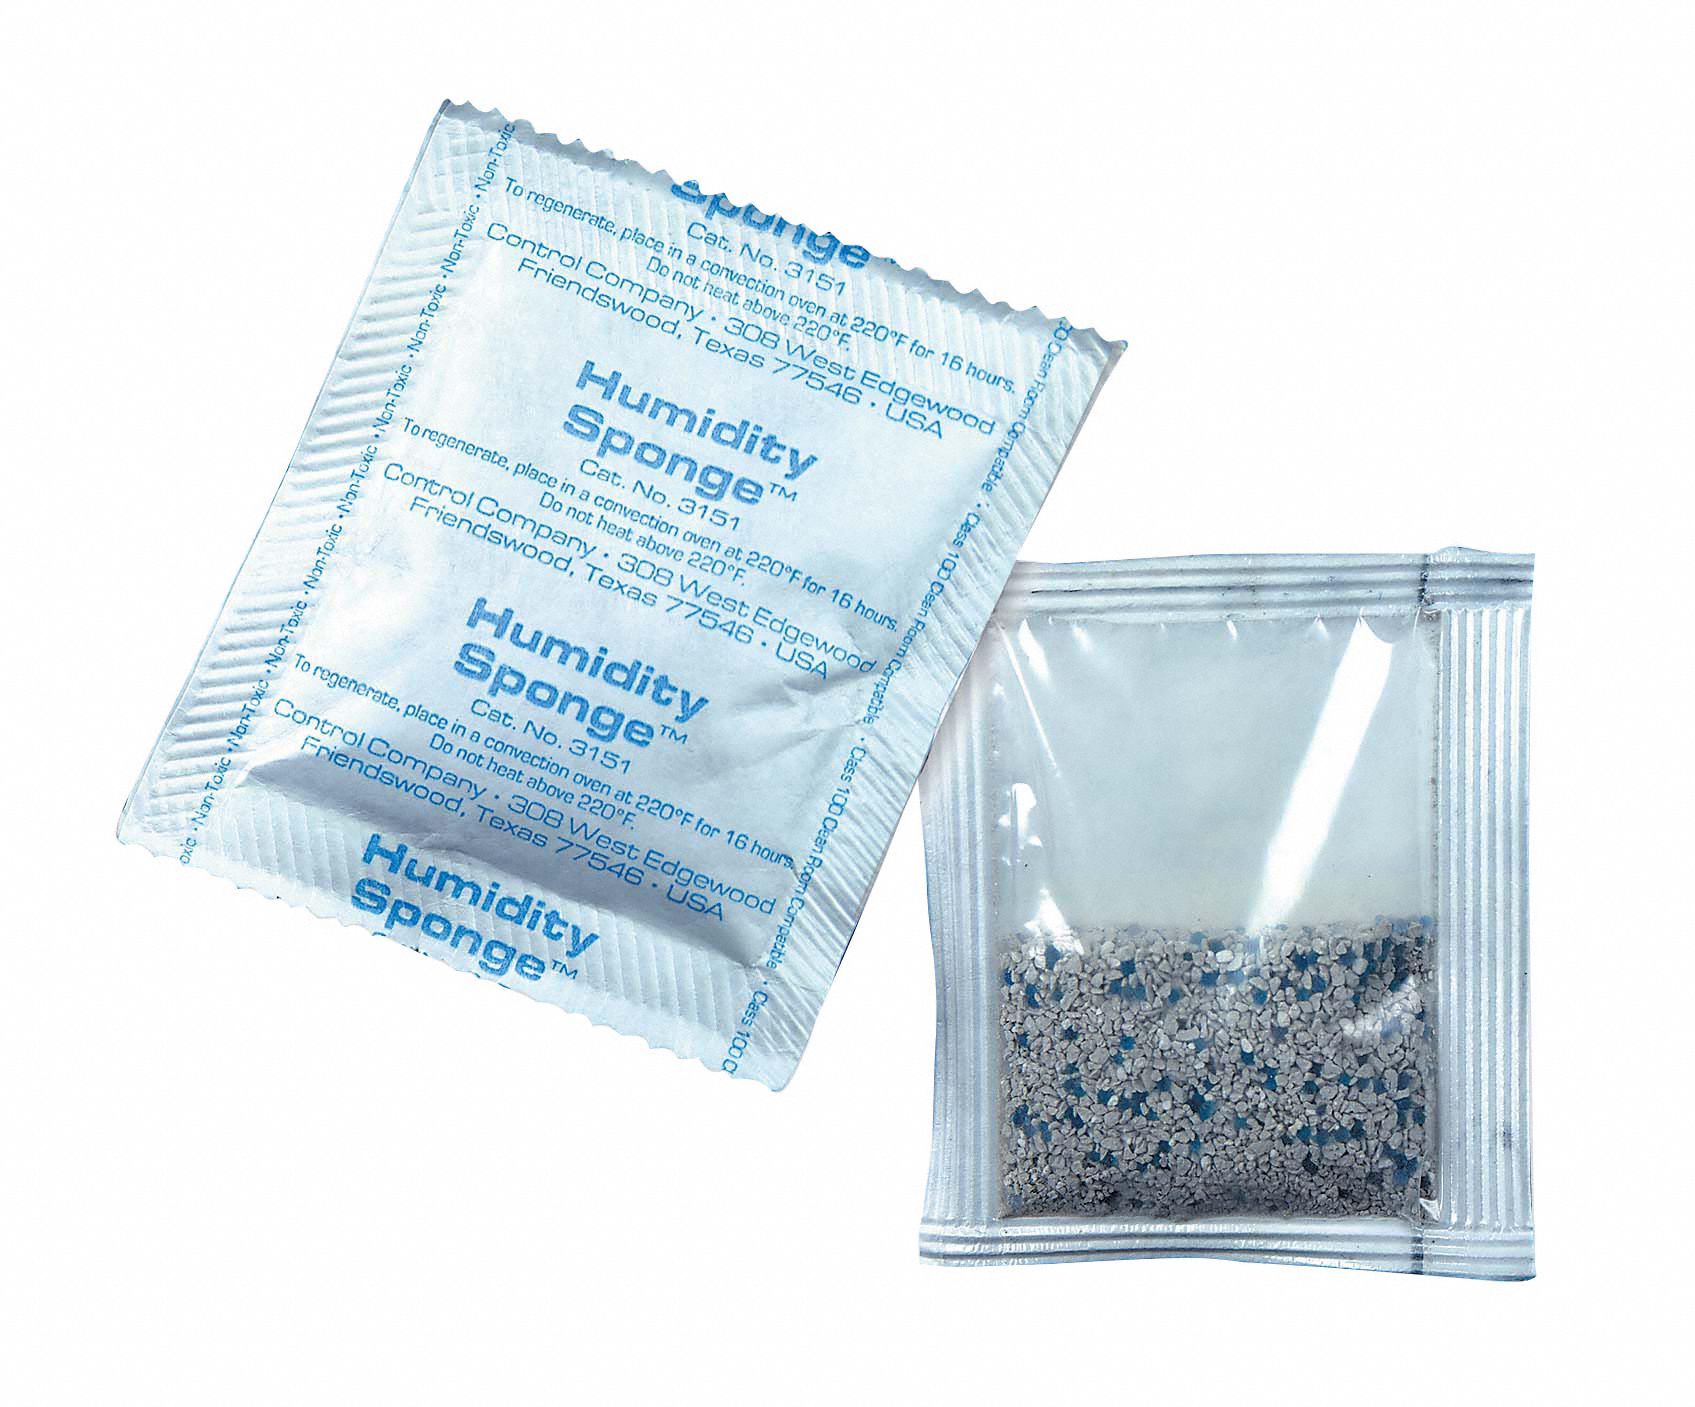 Humidity Sponge: 3 in Wd, 3 in Lg, 476 cu in Area Protected, 3/8 oz Desiccant Bag Size, Bag, 40 PK